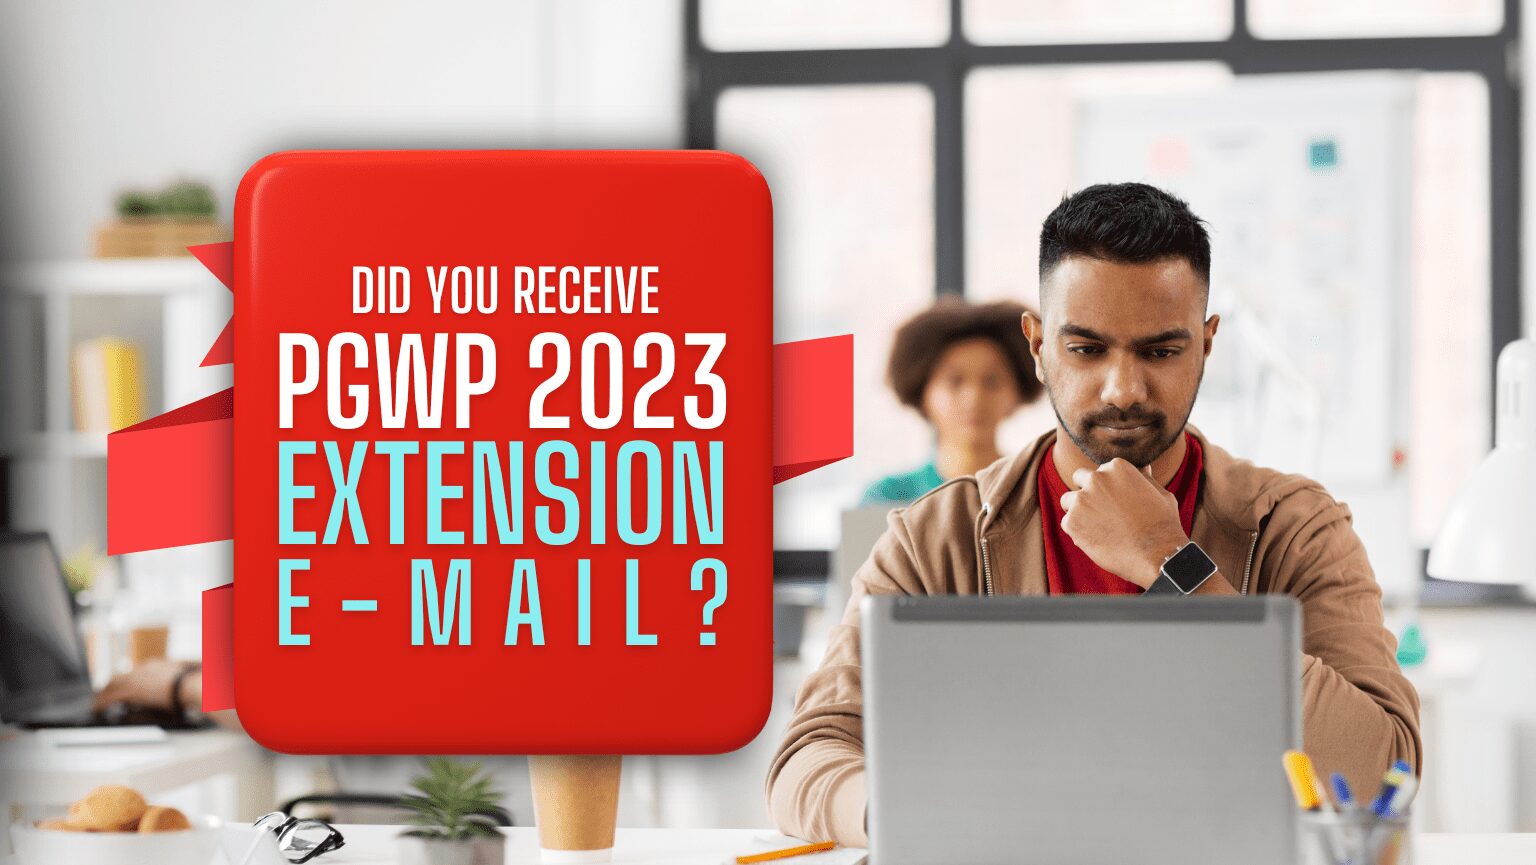 04.06.23  BLOG BANNER  Did You Receive PGWP 2023 Extension Email 